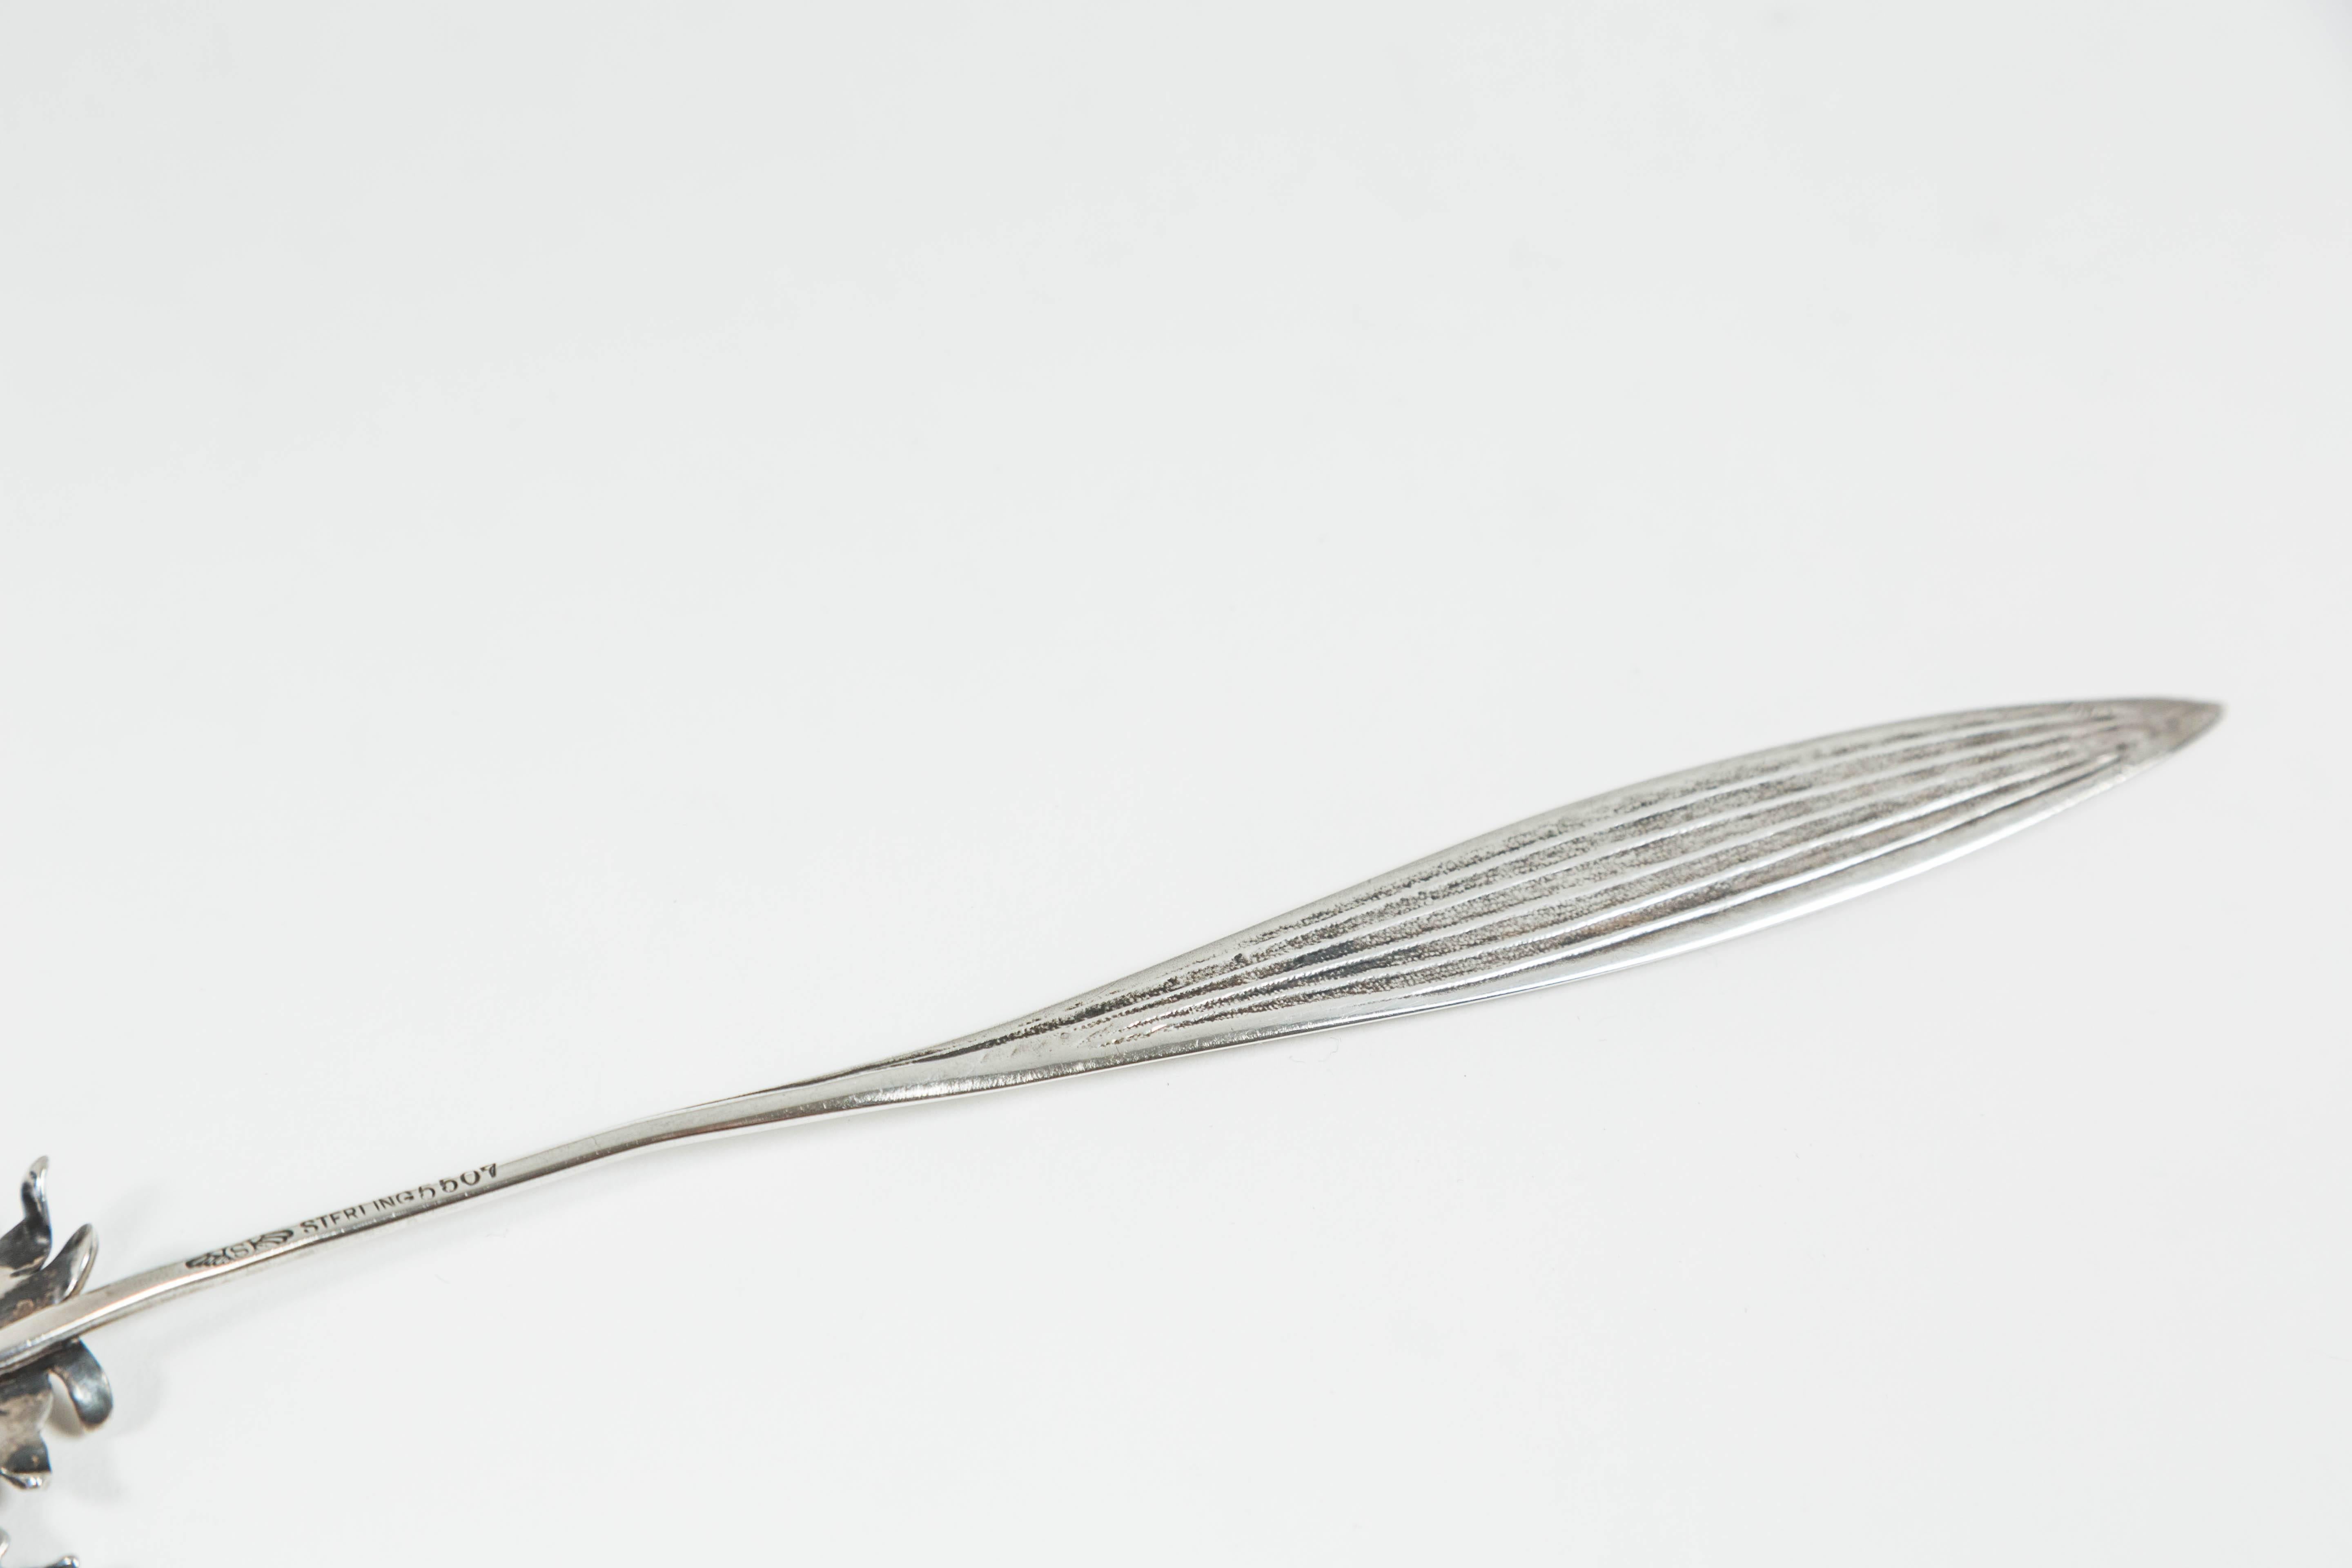 Cast Unique Sterling Chrysanthemum Letter Opener by George W. Shiebler